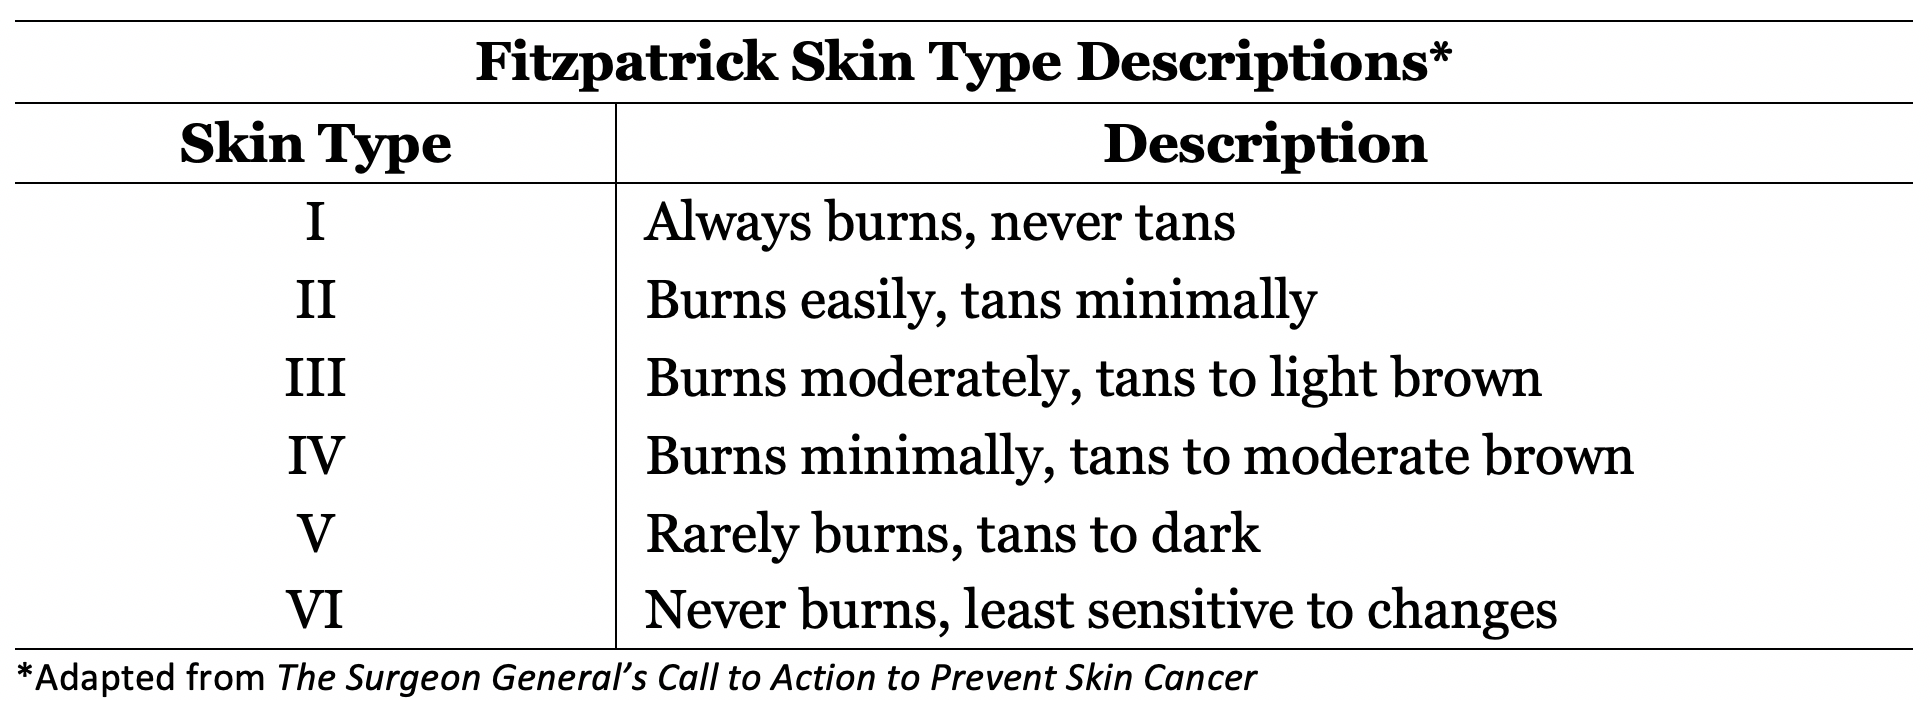 Burning and tanning descriptions of Fitzpatrick Skin Types I - VI.